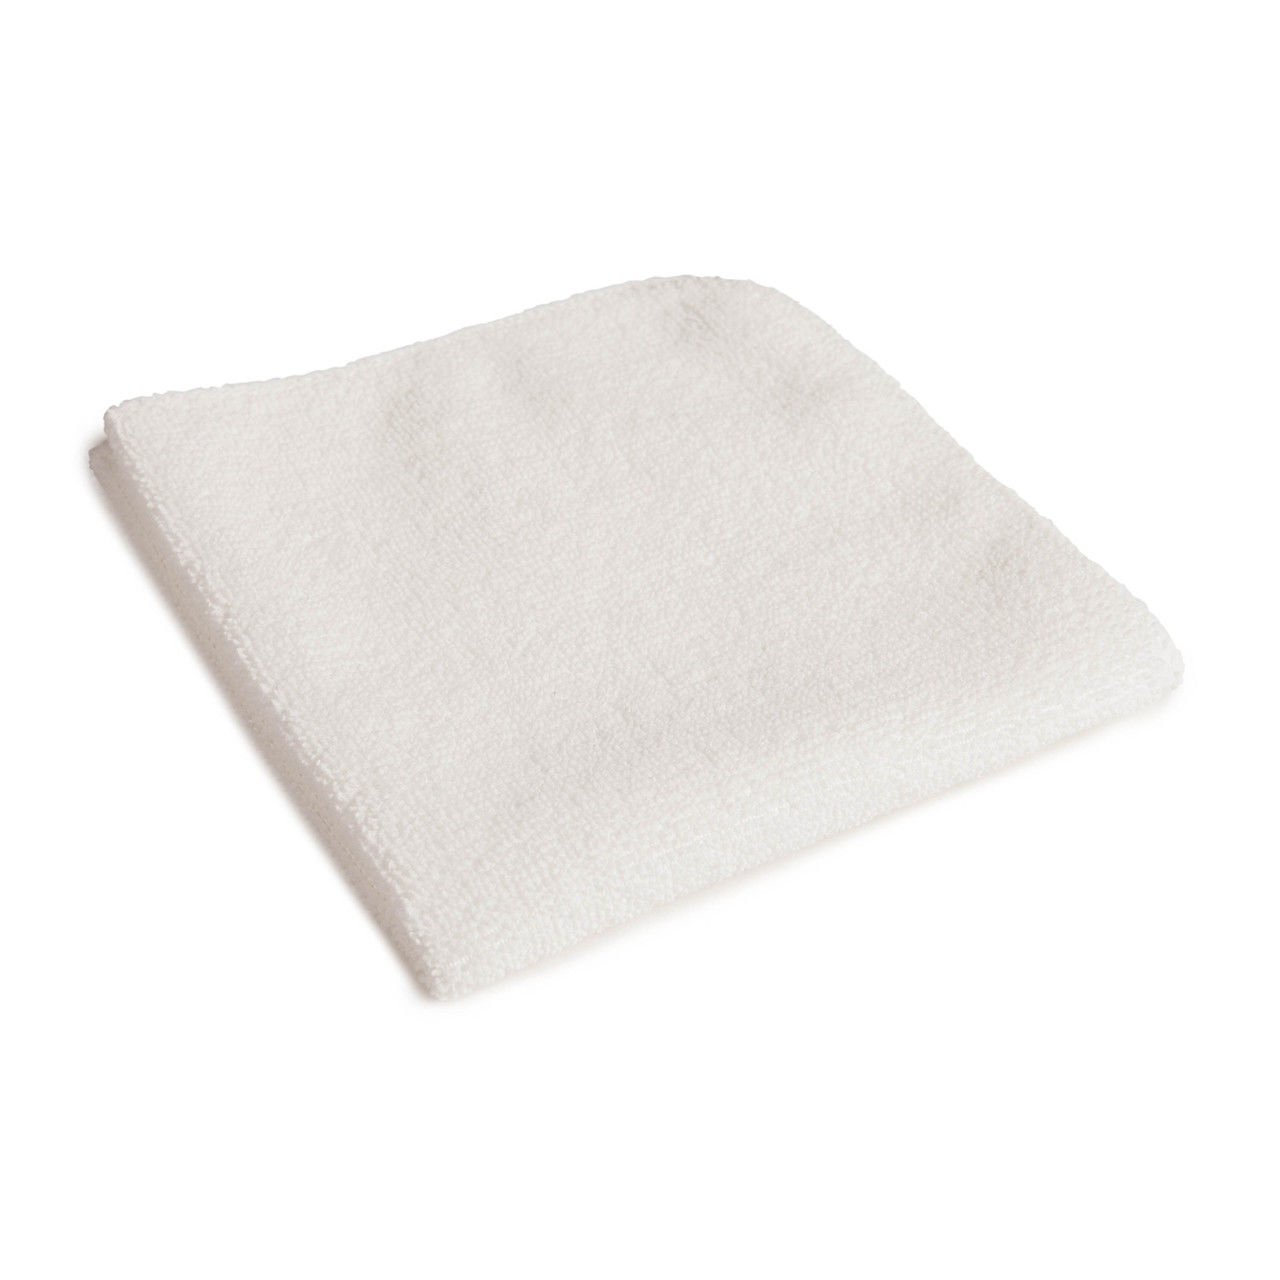 Dairy Towel Washcloth Questions & Answers